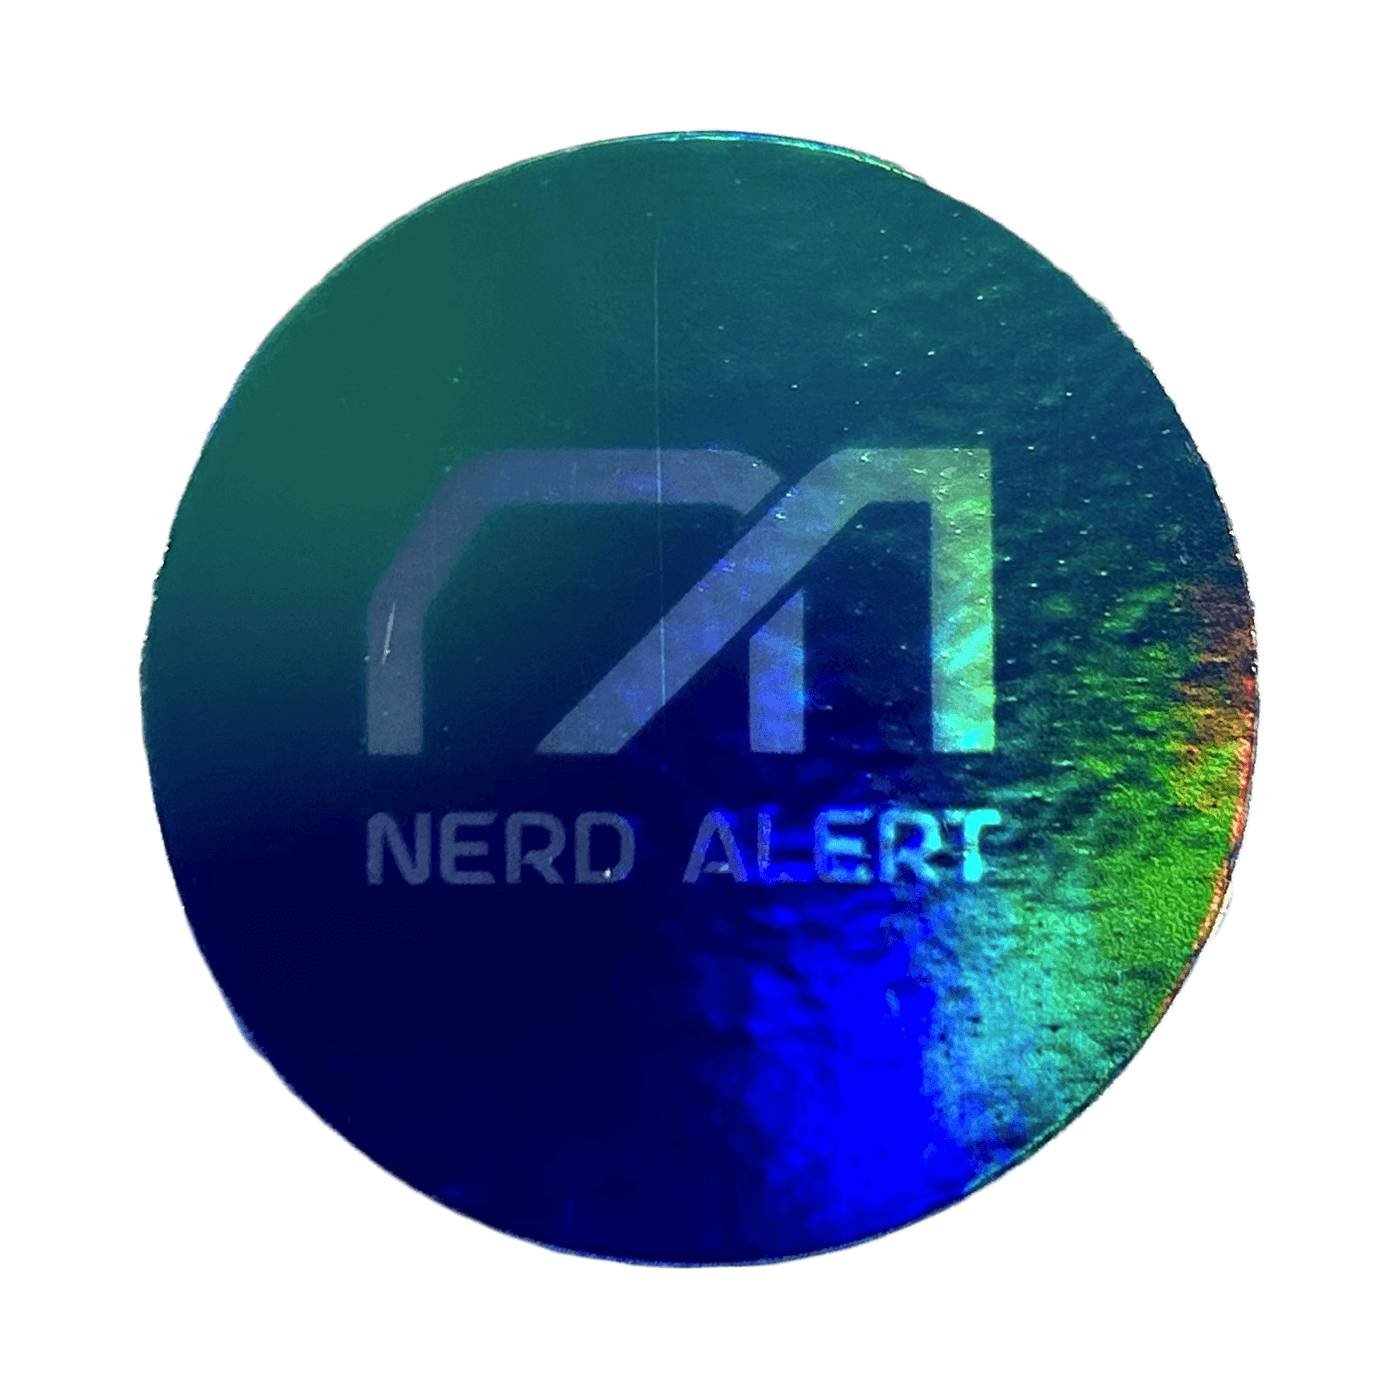 A round rainbow holographic sticker with the Nerd Alert logo as the primary design.